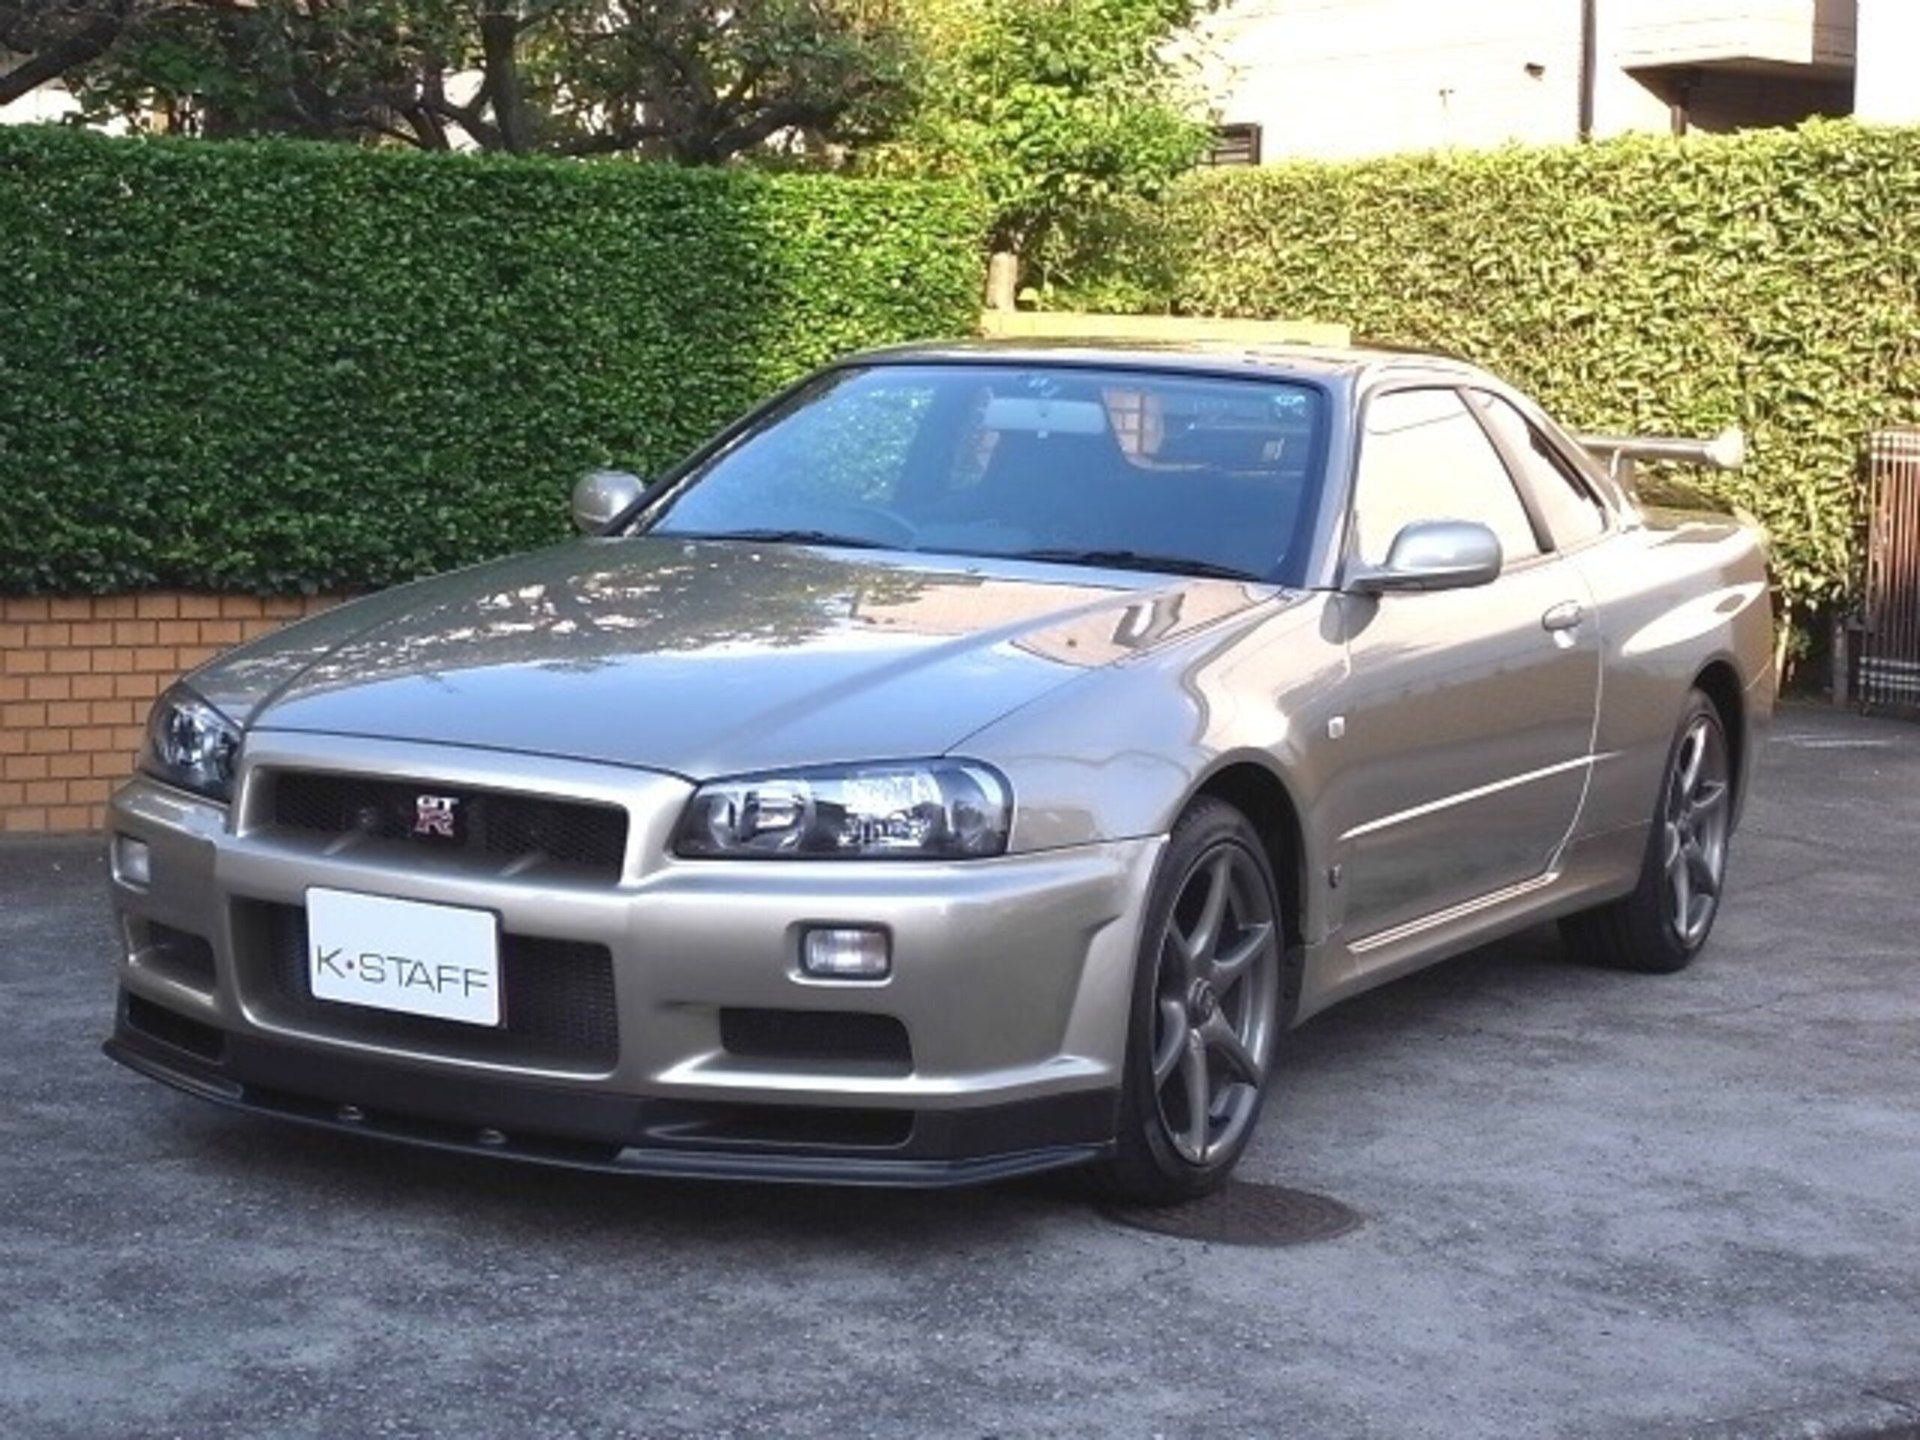 R34 SKYLINE GT-R M-SPEC 6MT NOT USED UNDER RAIN CONDITION STORED